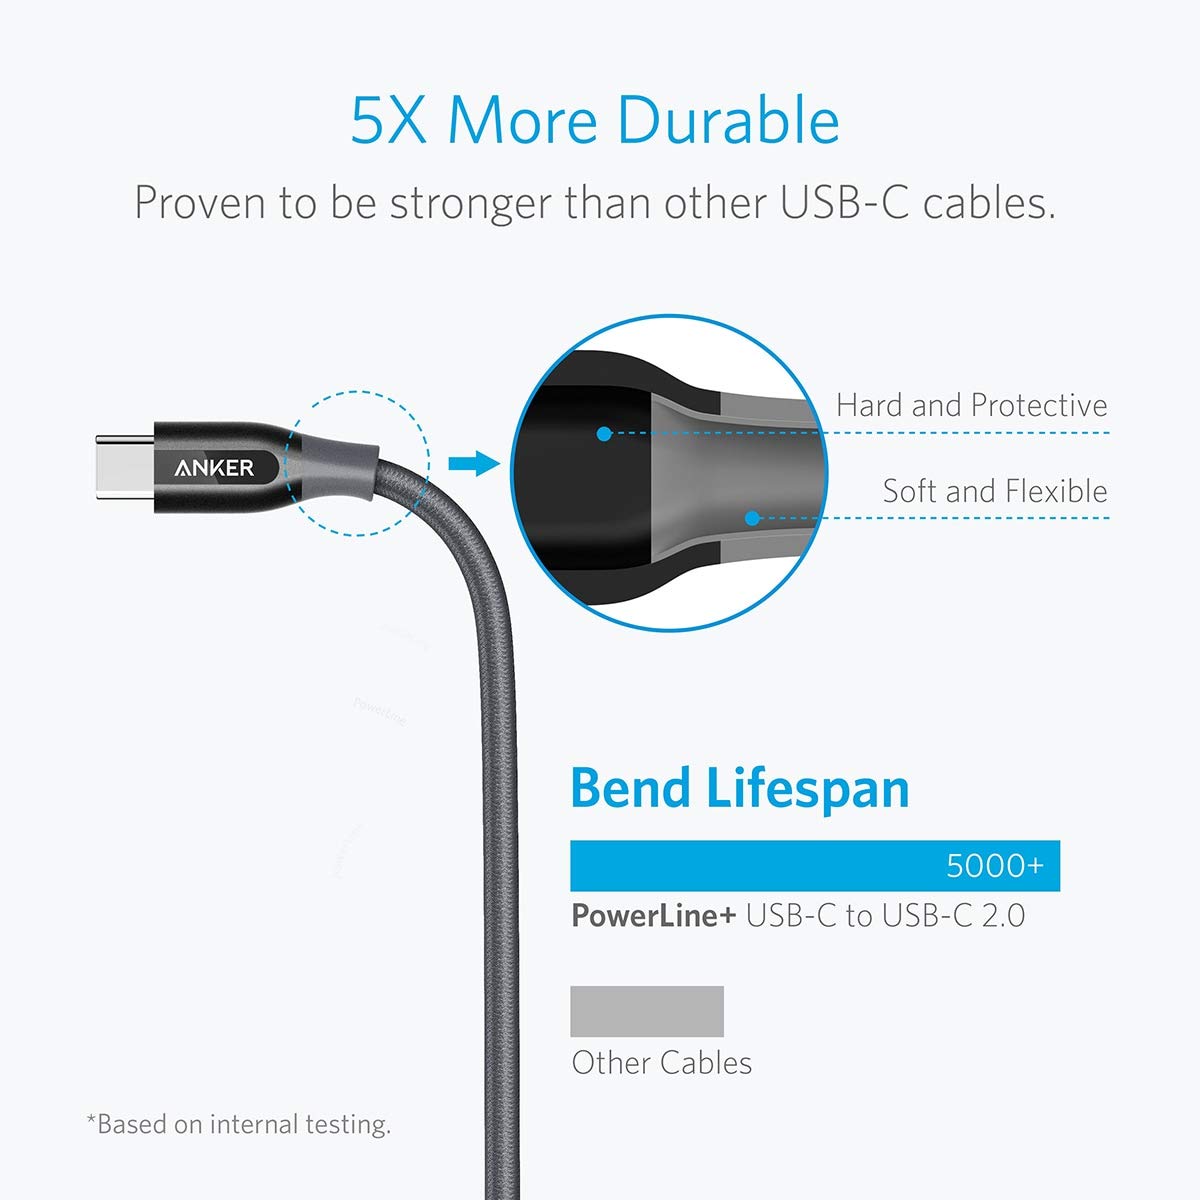 Anker Powerline+ USB C to USB C Cable, 60W USB 2.0 Cable (6ft), for USB Type-C Devices Including Galaxy Note 8 S8 S8+ S9, iPad Pro 2020, Pixel, Nexus 6P, Matebook, MacBook and More